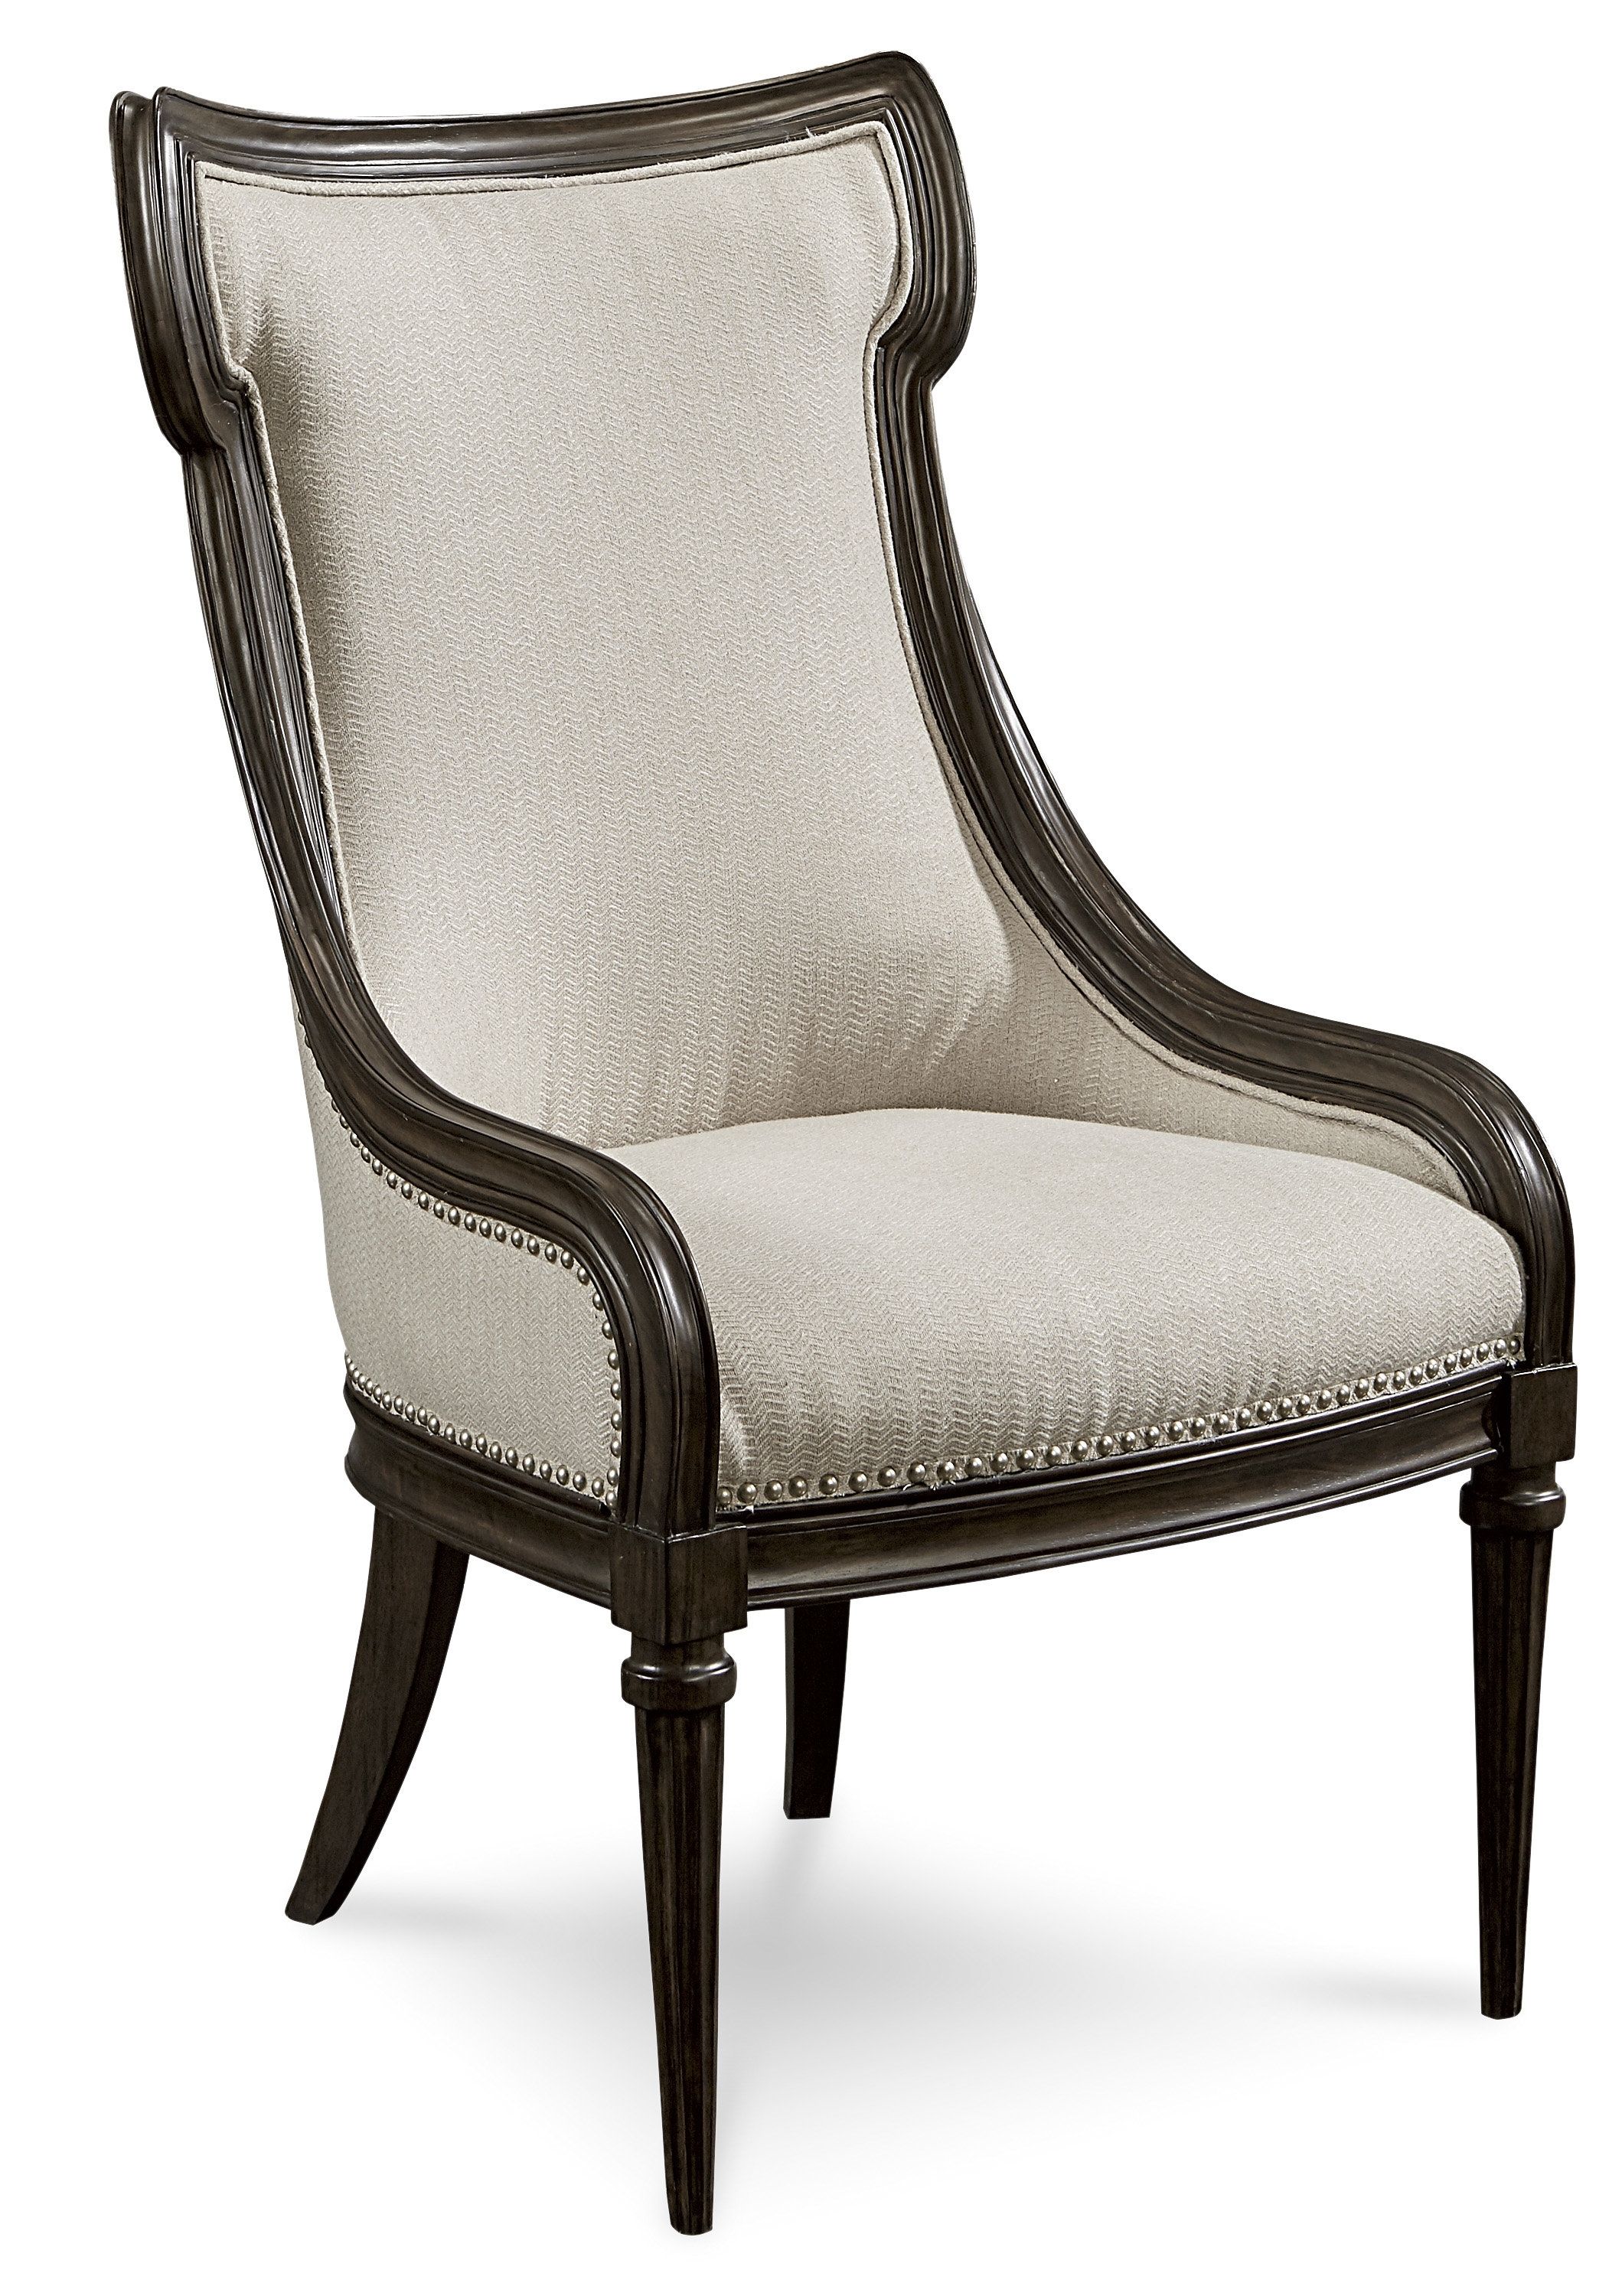 Most Recent Rosdorf Park Delahunt Upholstered Side Chair (View 12 of 20)